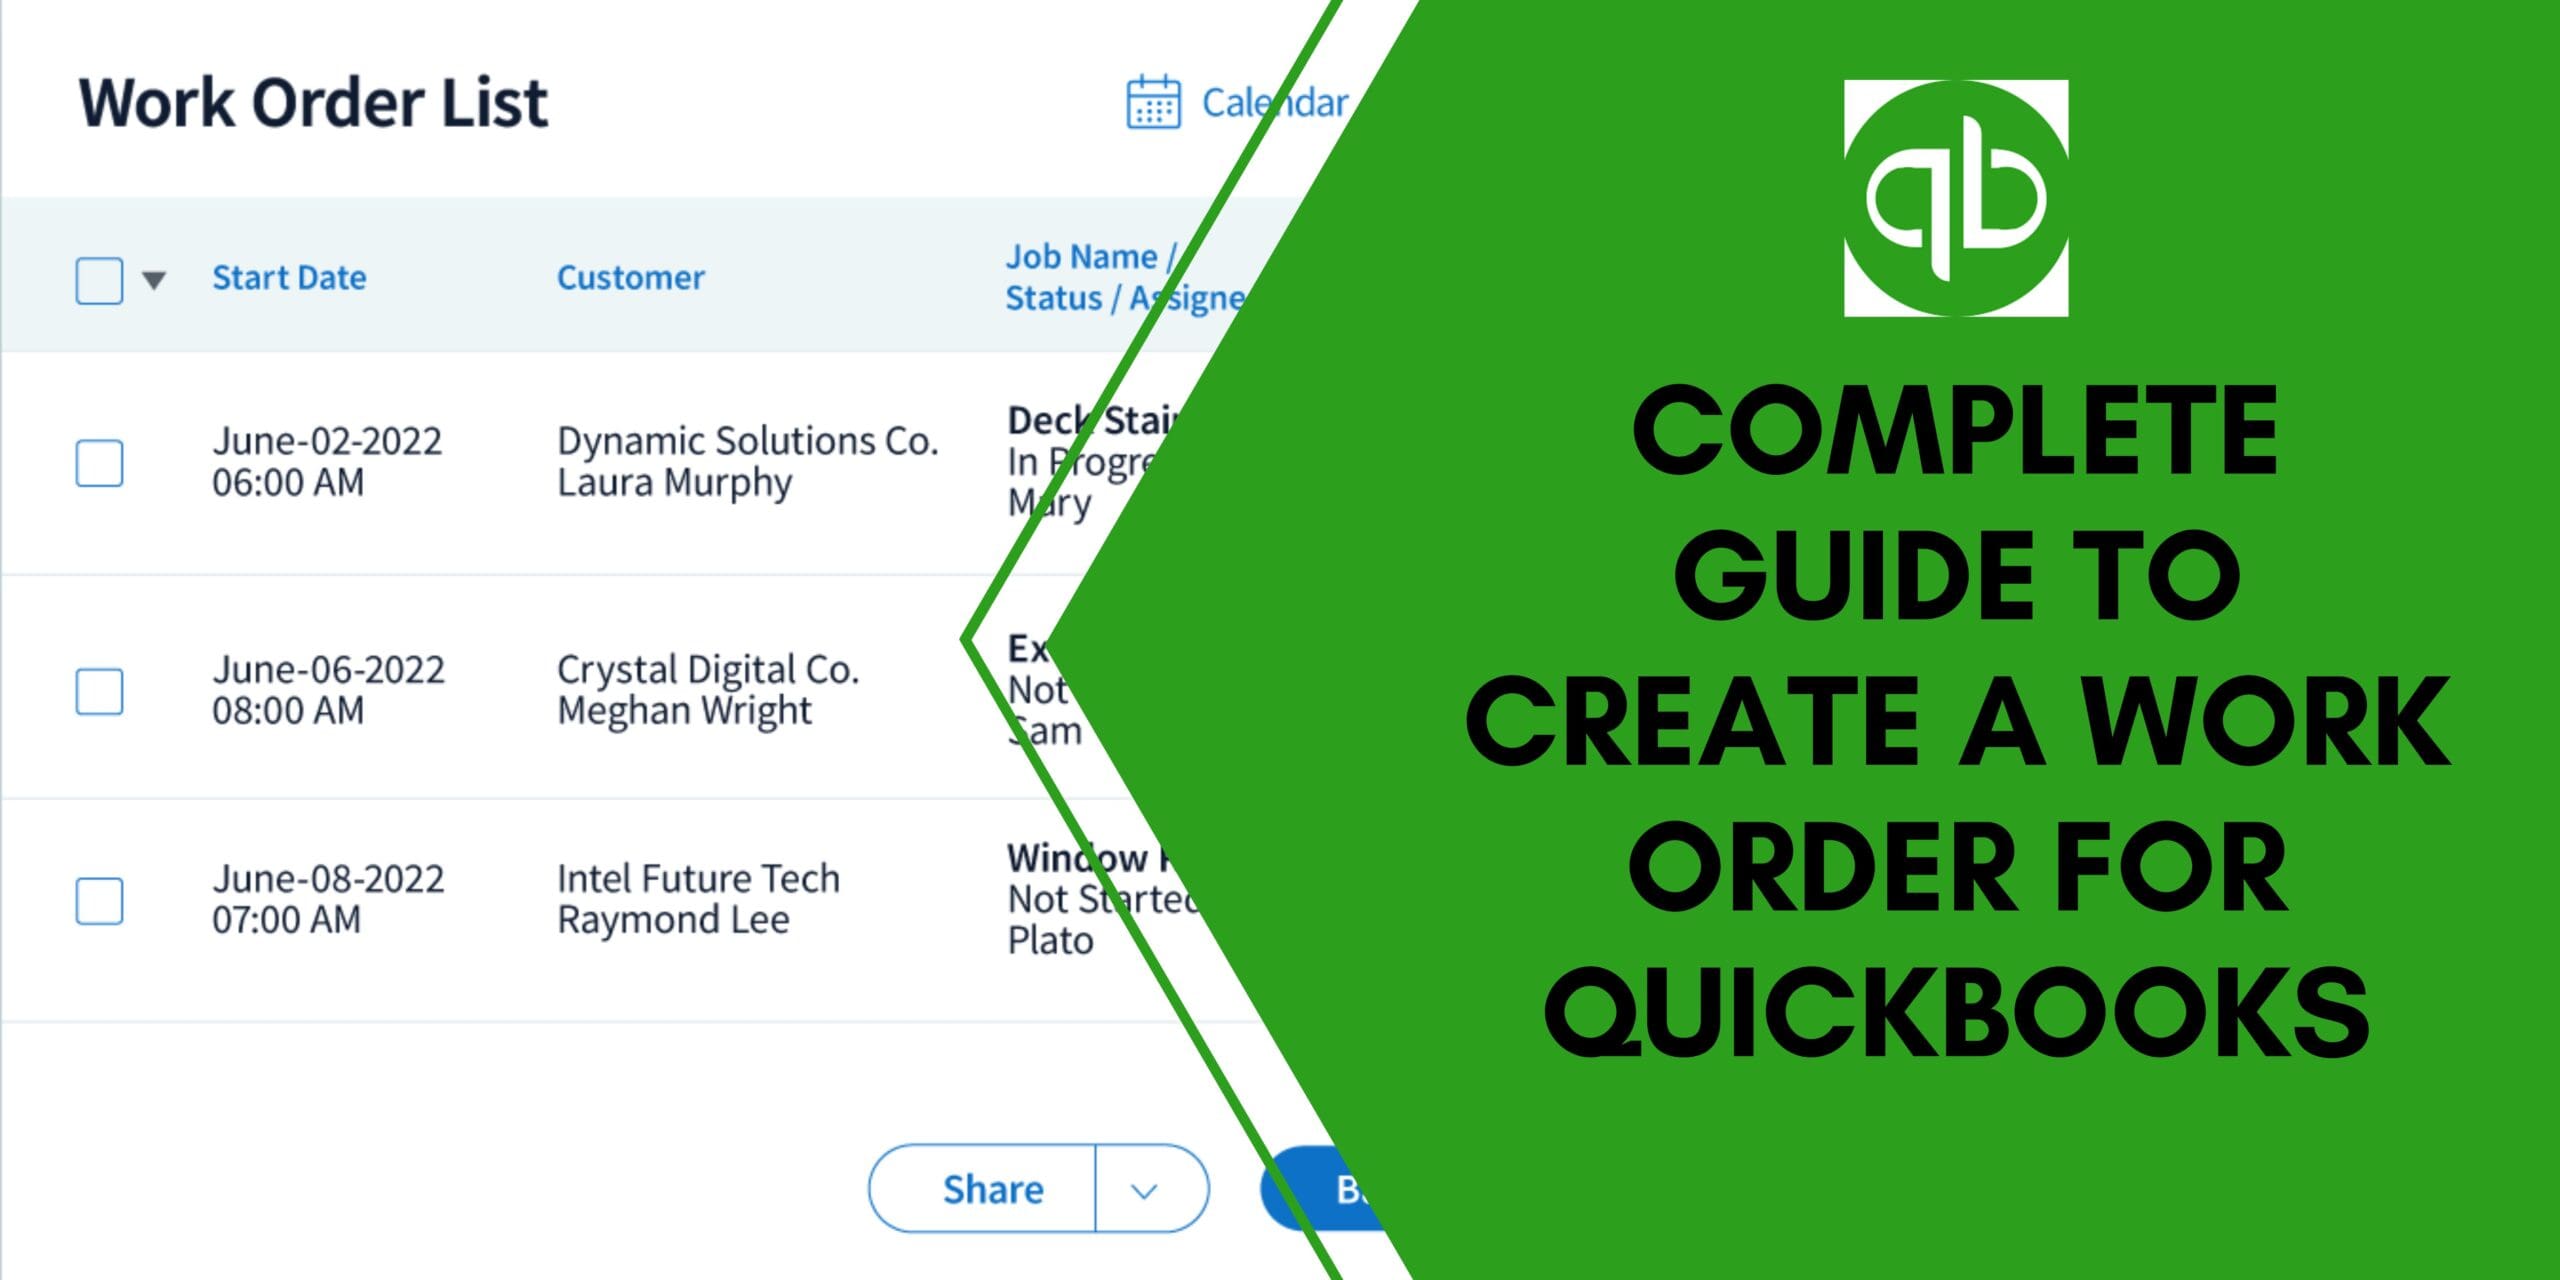 How to Create a Work Order for QuickBooks?